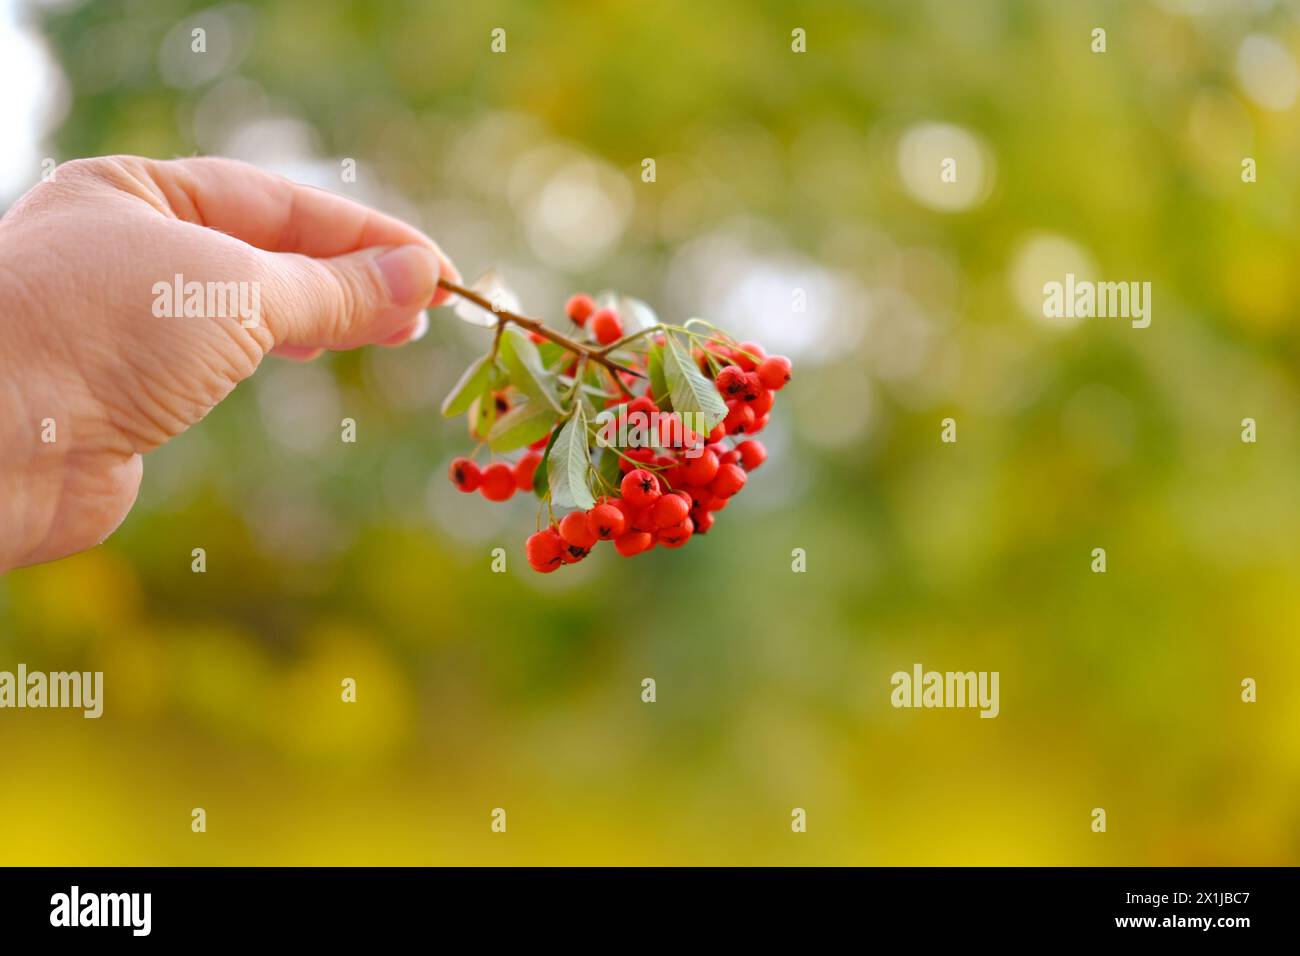 ripe red berries Pyracantha angustifolia in female hand, beautiful blurred natural landscape in background, interaction with plants, cozy autumn mood Stock Photo